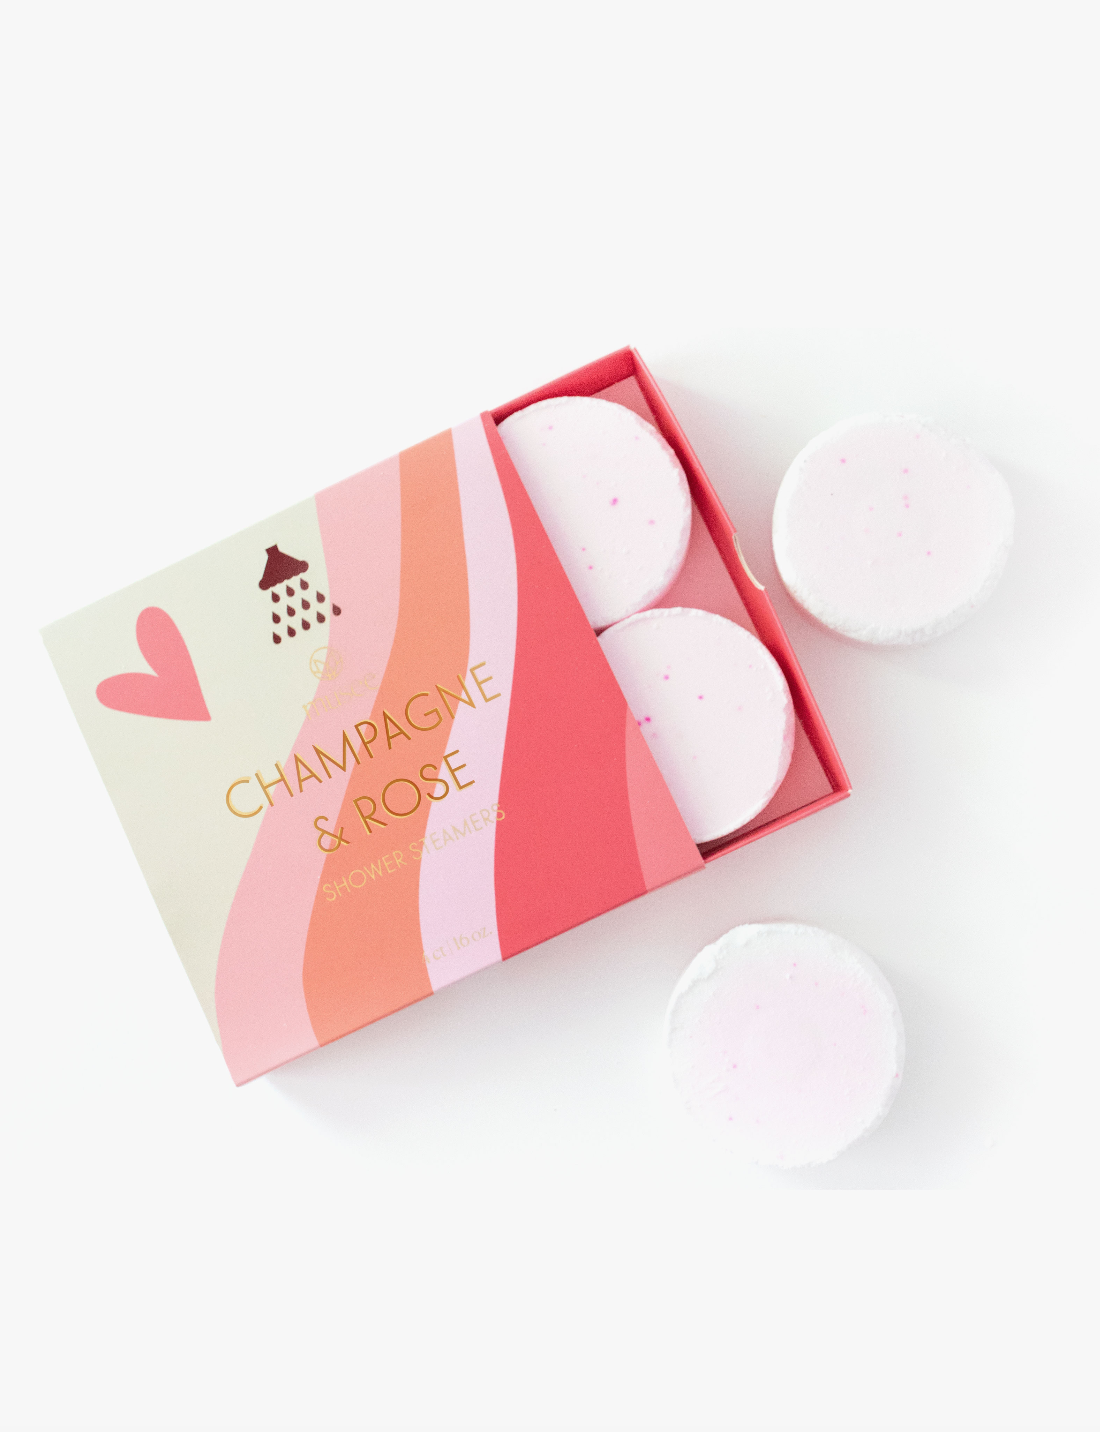 Shower Steamers: Champagne and Rose